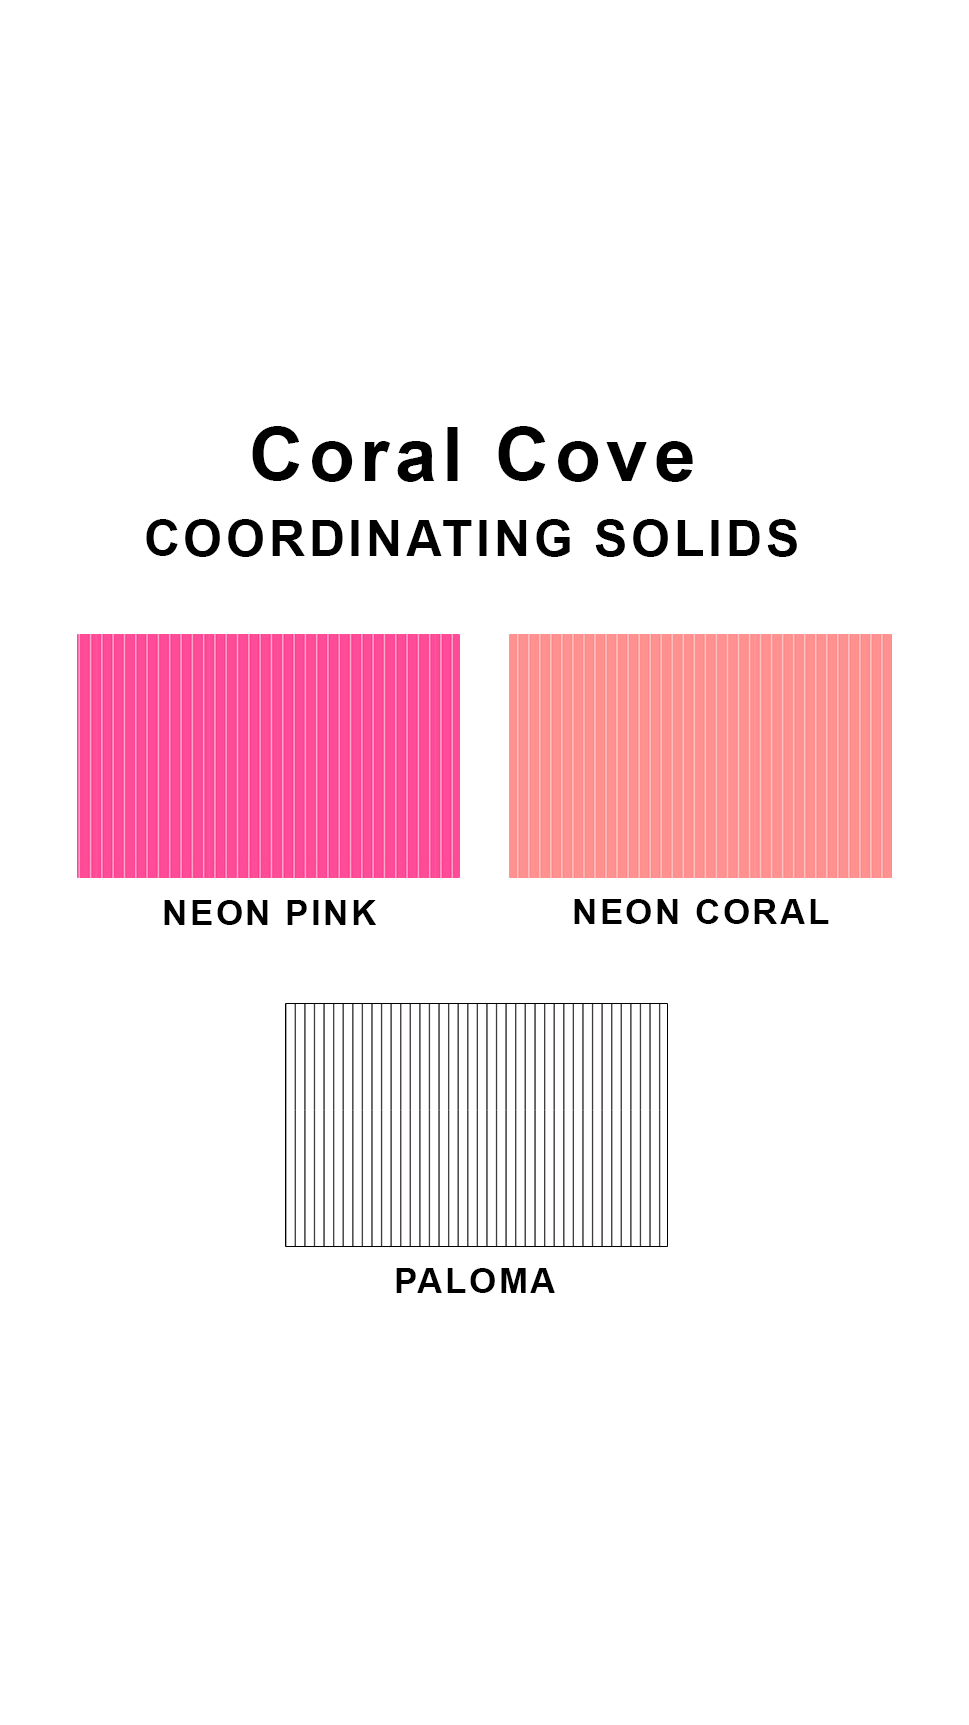 Coordinating solids chart for Sunsets Coral Cove swimsuit print: Neon Pink, Neon Coral, and Paloma